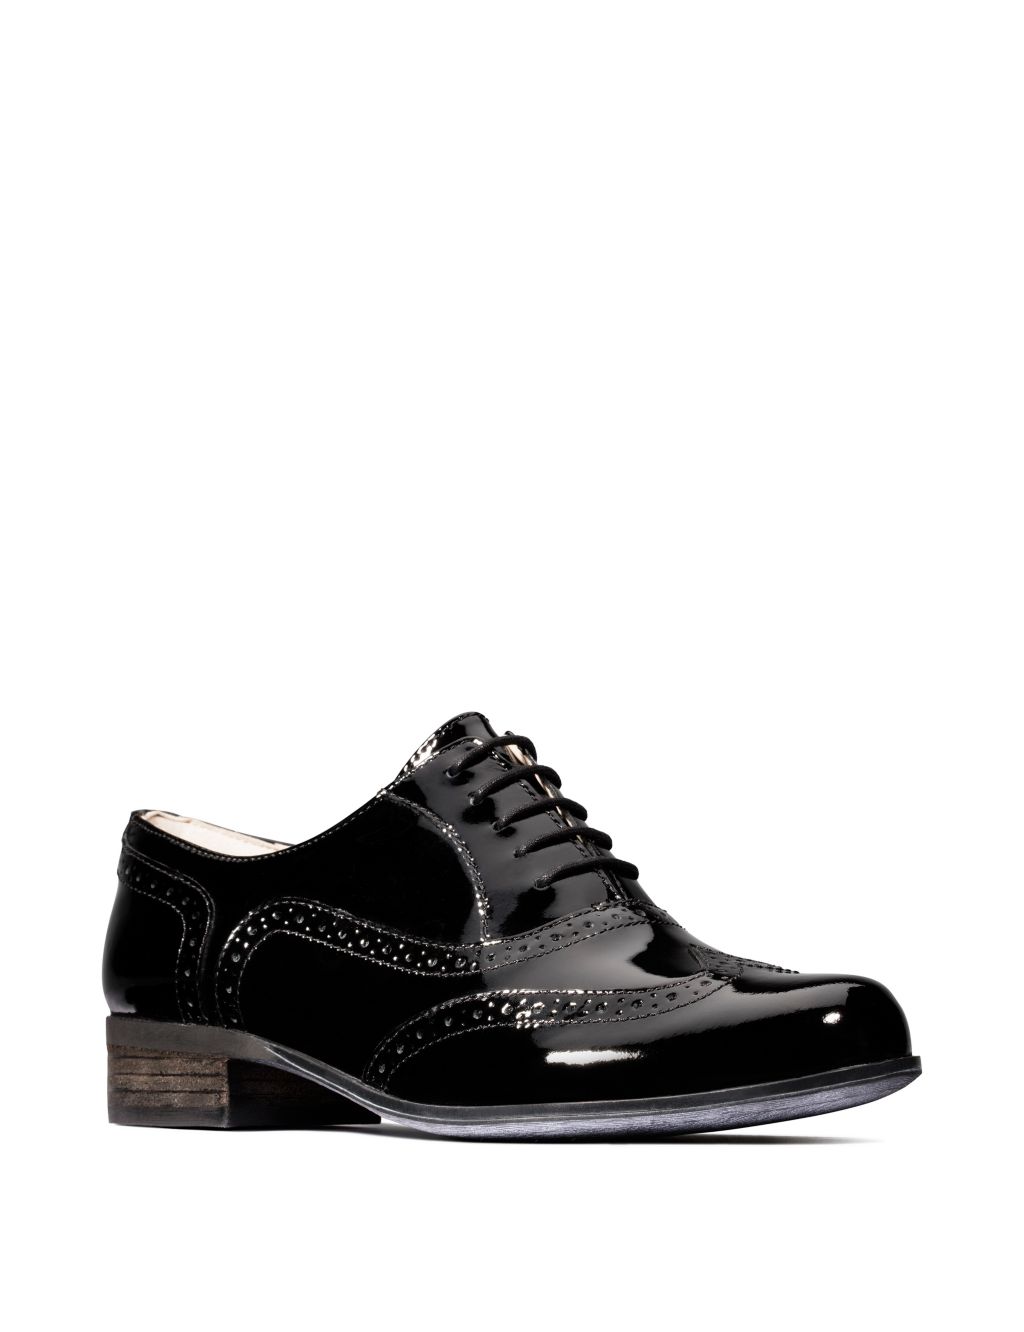 Leather Patent Lace Up Brogues image 2